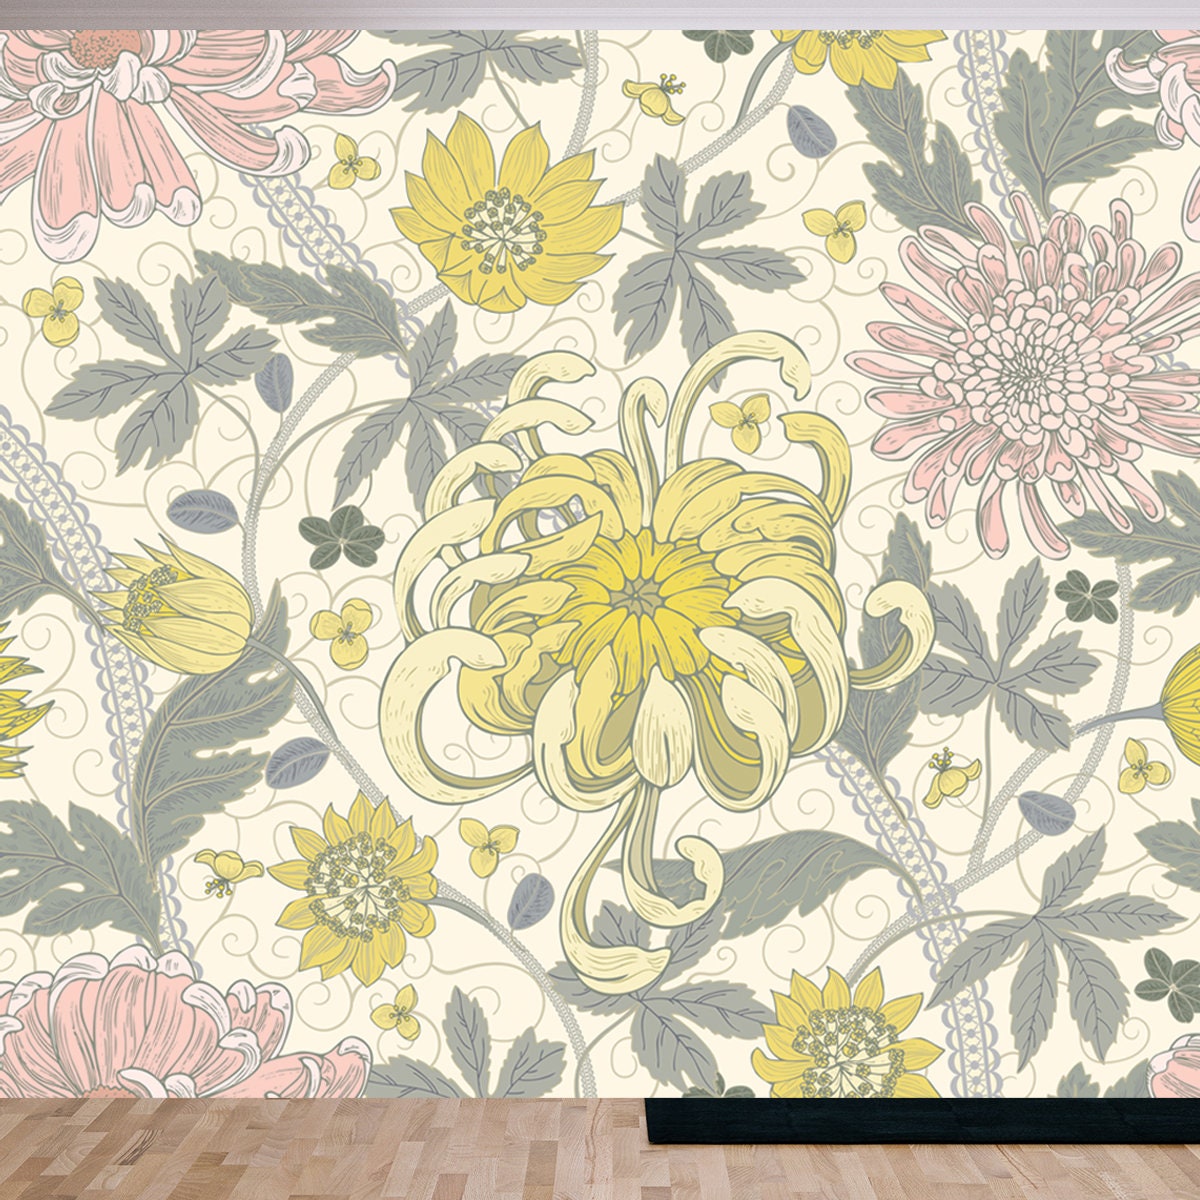 Arts and crafts Style Floral Seamless Pattern. Chrysanthemum Garden Background, Floral Backdrop Wallpaper Living Room Mural